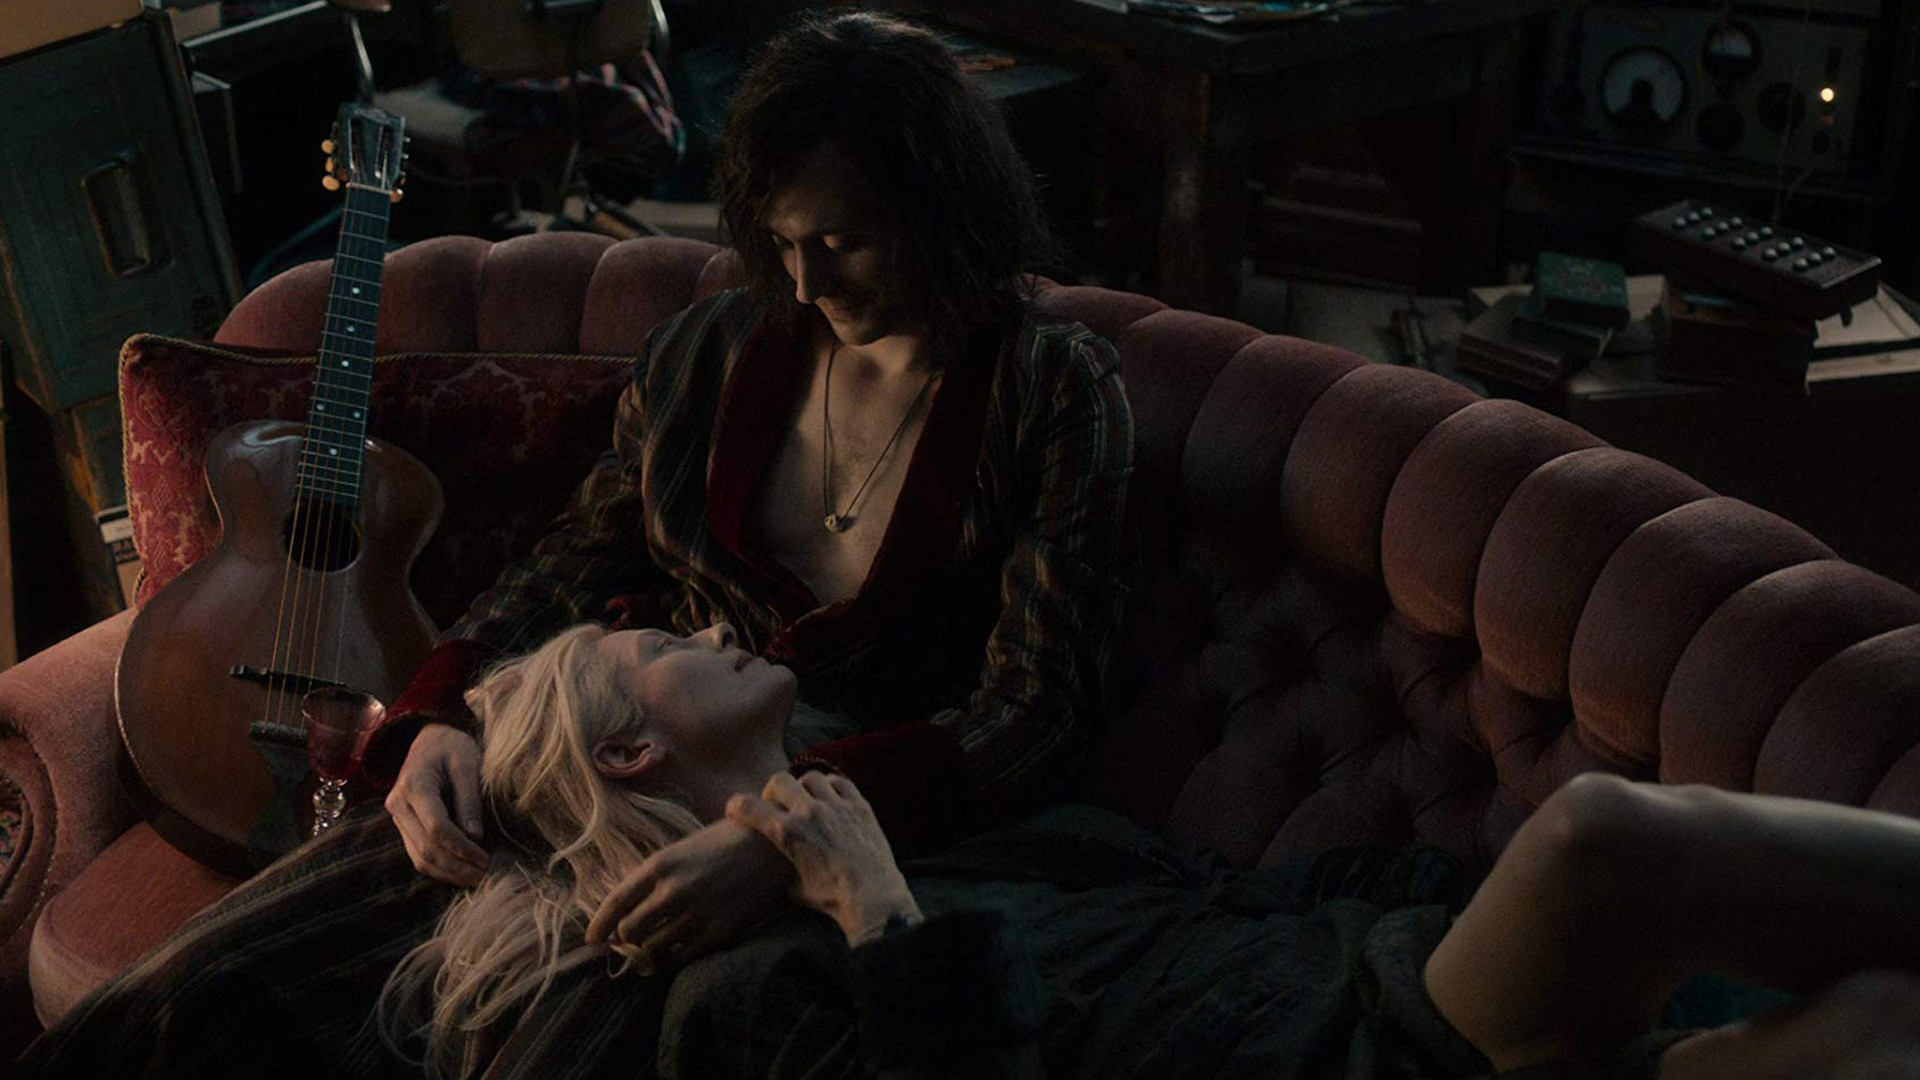 Only Lovers Left Alive movies, Samantha Simpson photos, Posted by Samantha, Wallpapers, 1920x1080 Full HD Desktop